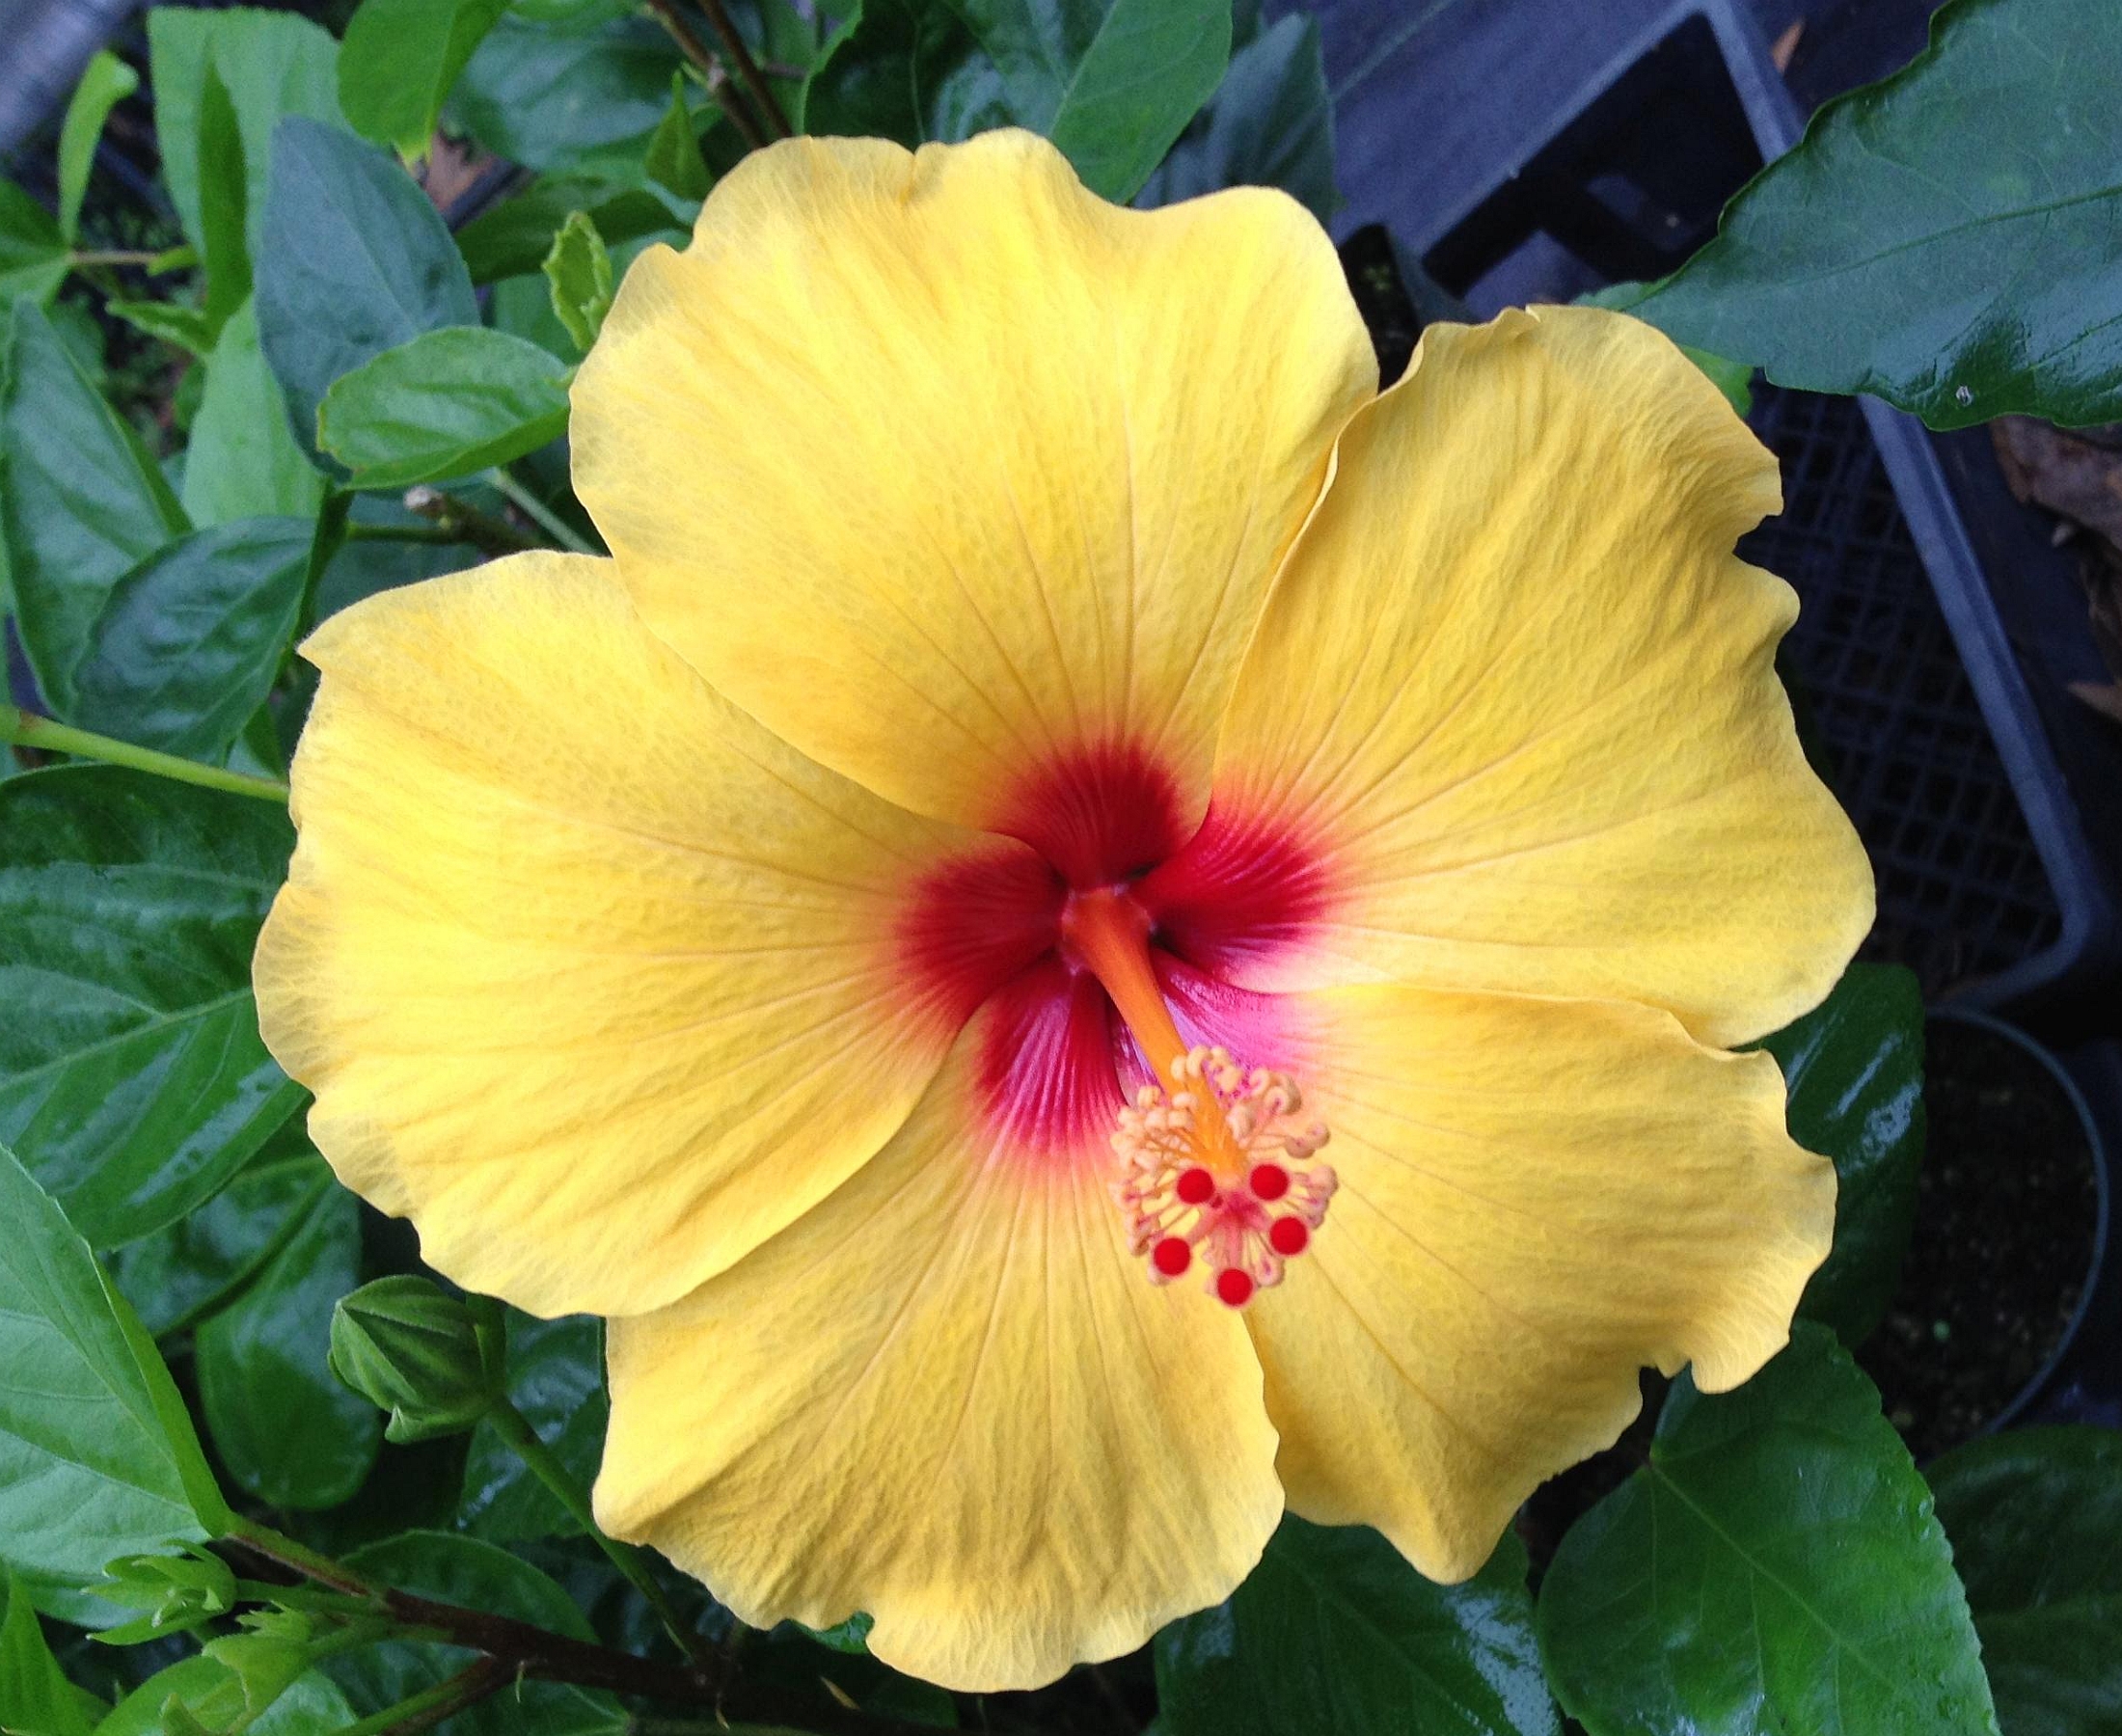 SANIBEL Tropical Hibiscus Live Plant Large Golden Yellow Red Throat ...